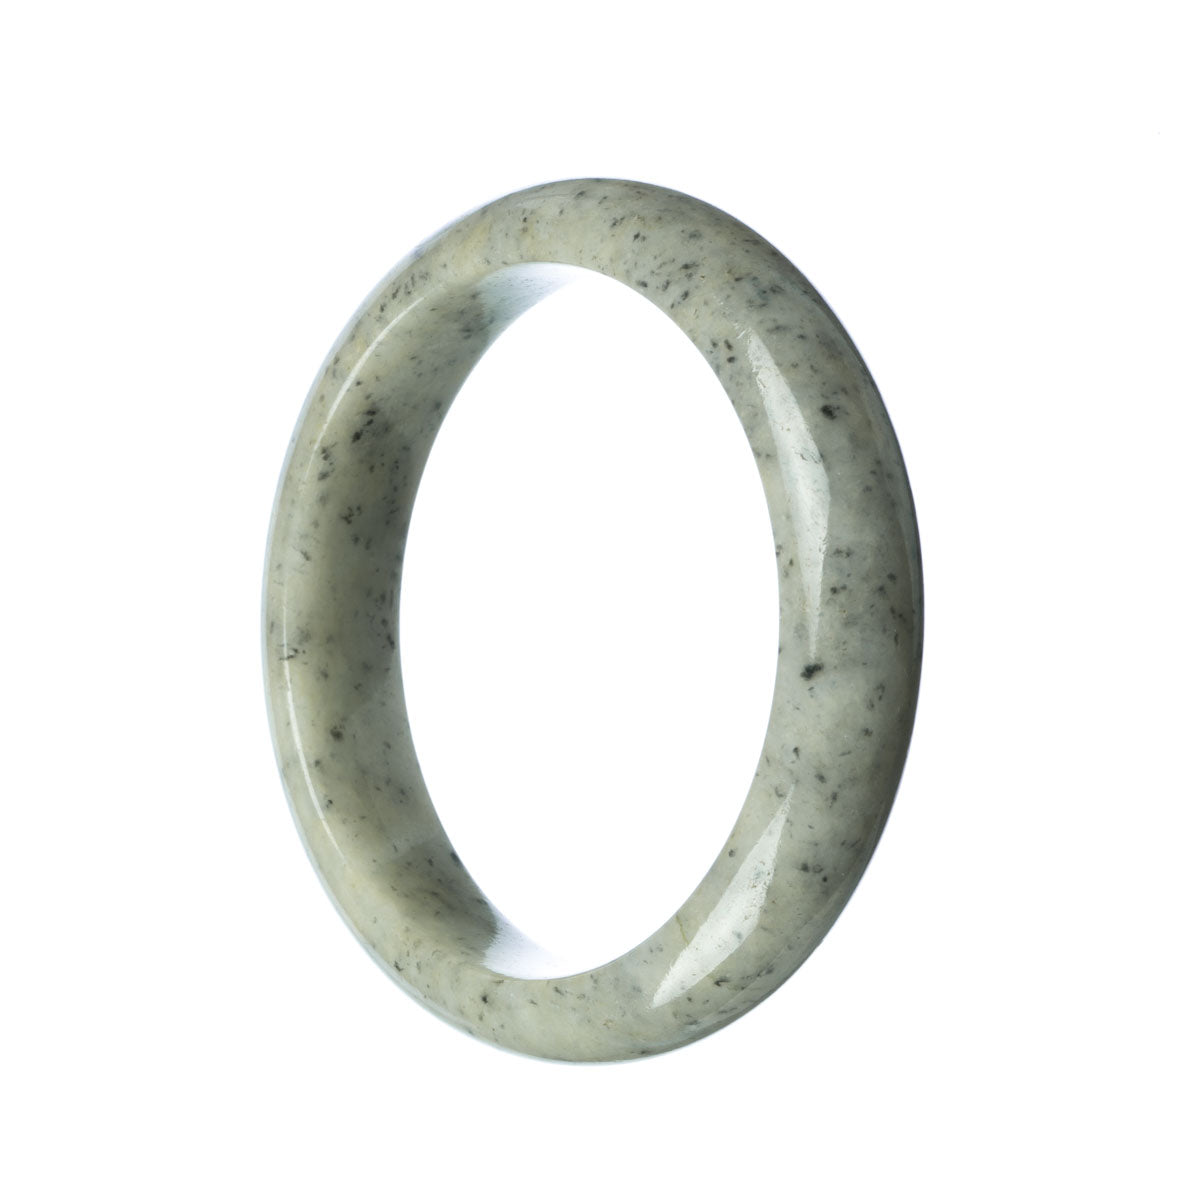 A close-up image of a grey jade bangle bracelet with a half-moon shape. The bracelet appears smooth and polished, showcasing the natural beauty of the grey jade stone.